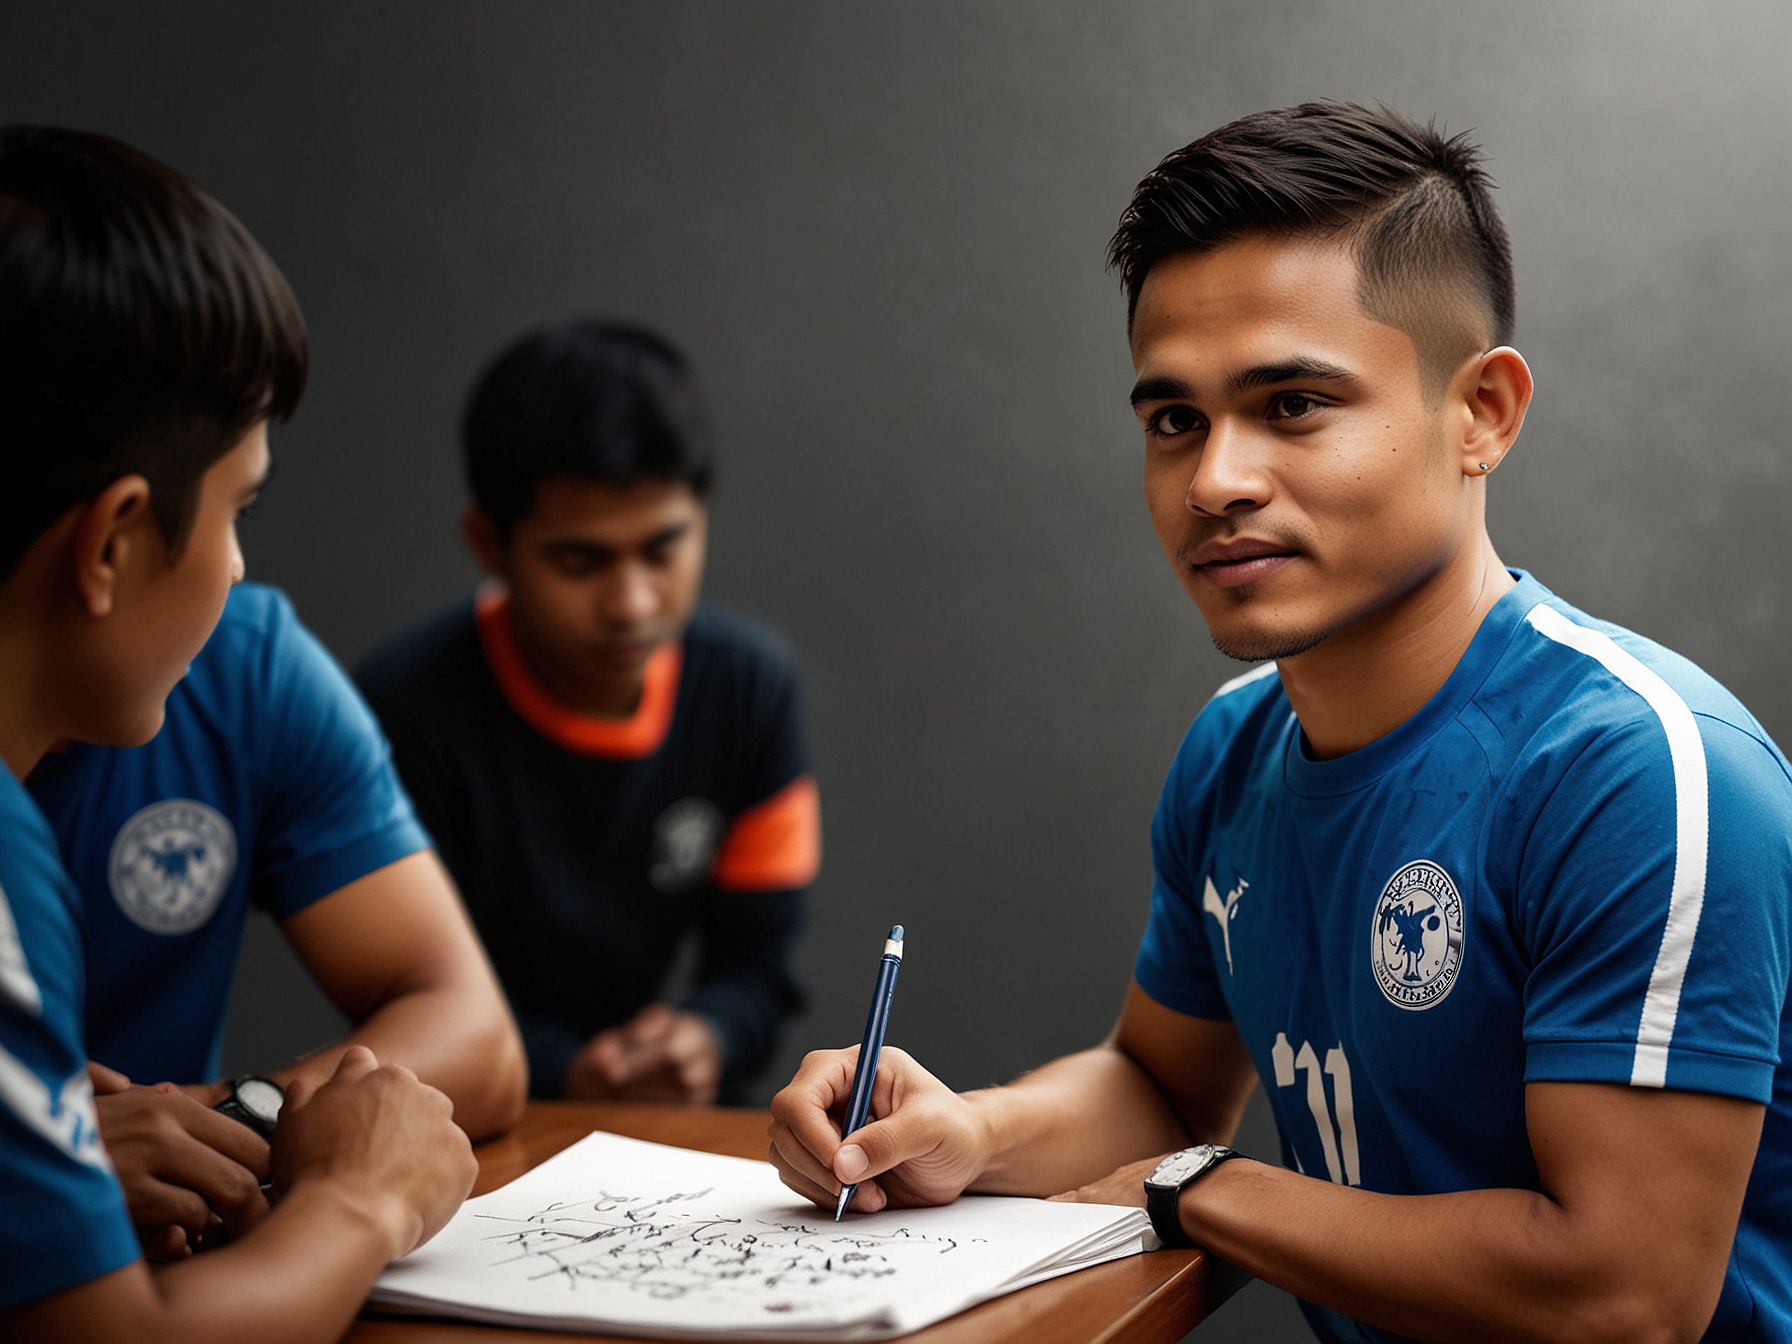 An image of Sunil Chhetri signing autographs for fans, highlighting the strong bond he shares with his supporters.